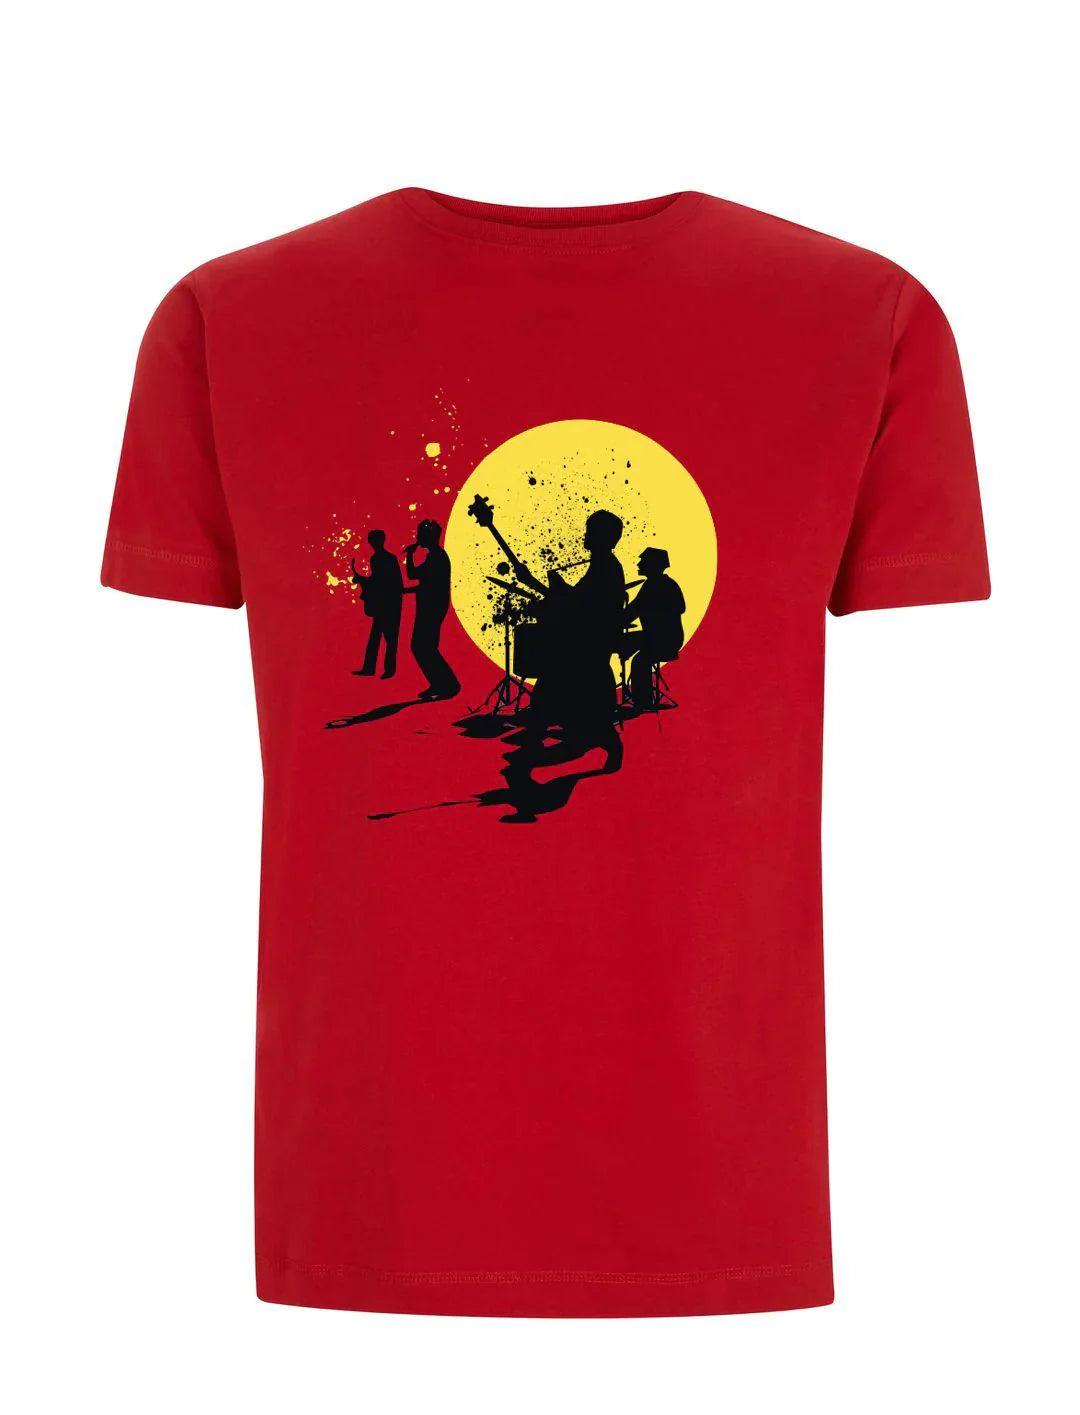 REHEARSALS (Red): T-Shirt Inspired by The Stone Roses - SOUND IS COLOUR